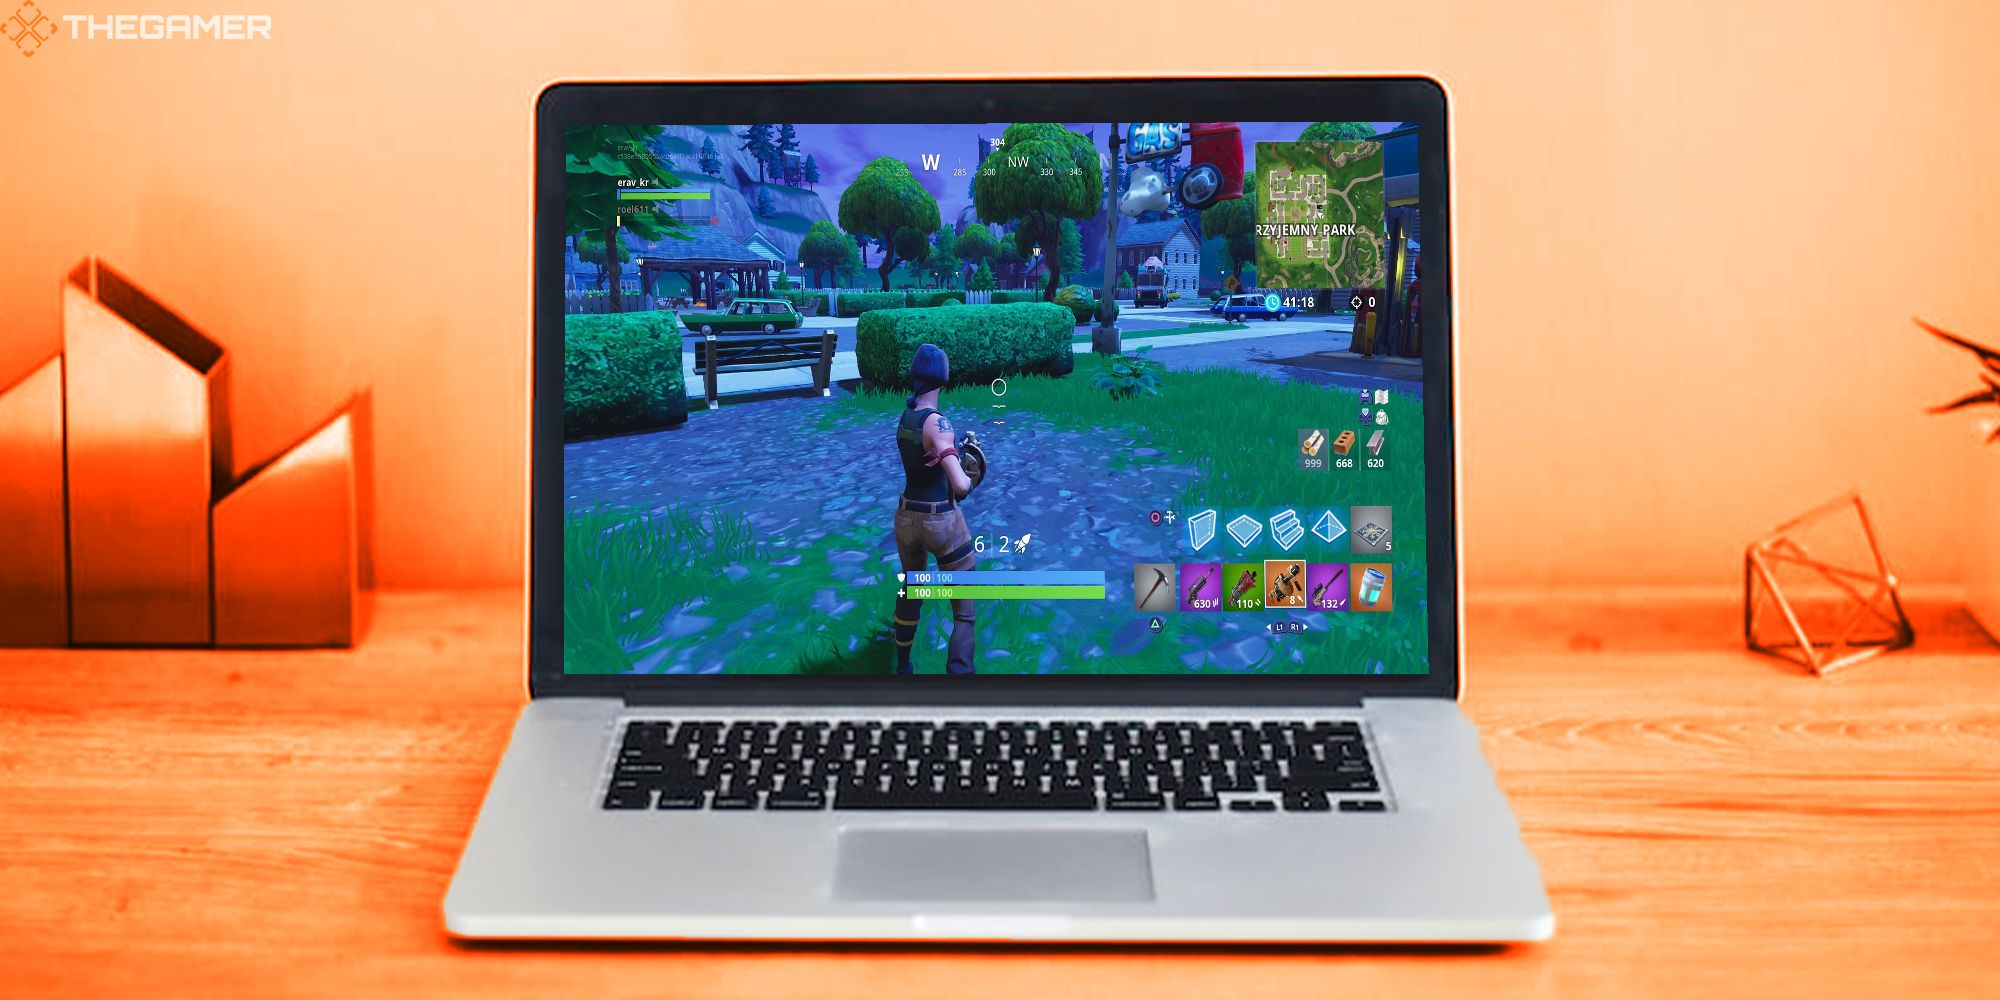 A laptop runs Fortnite in an orange tinted office room. Custom image for TG.